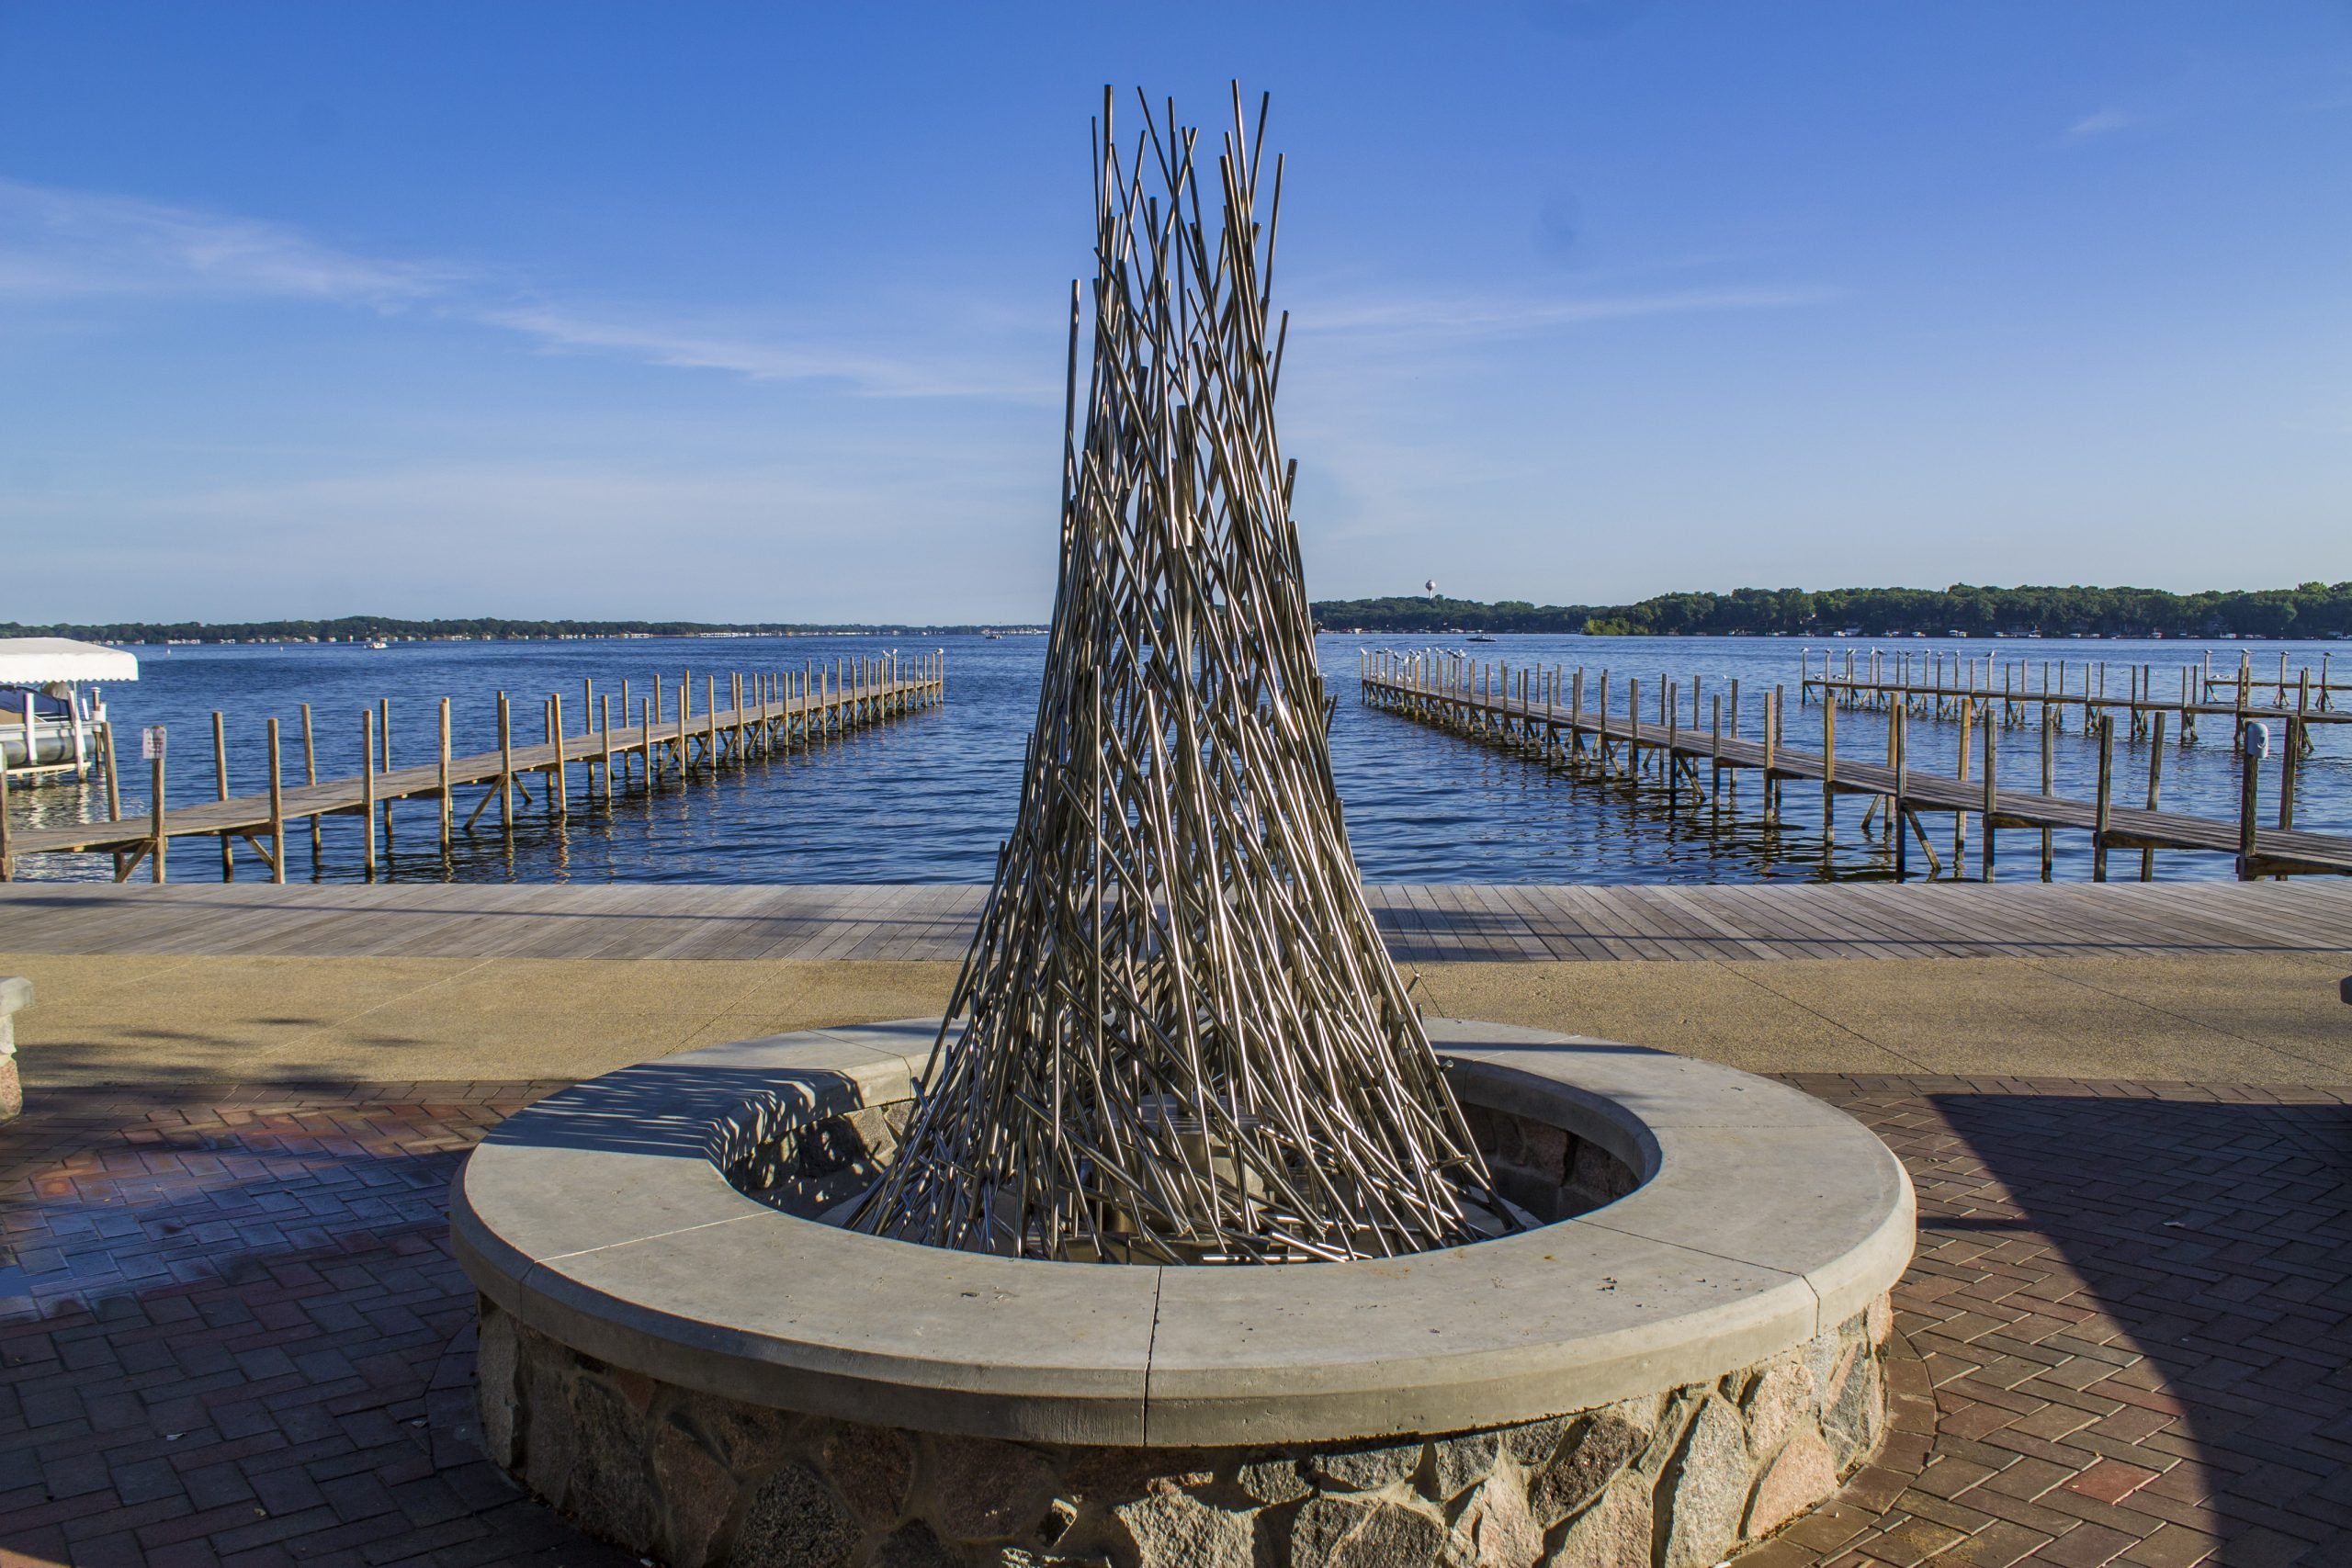 Sculpture at the Arnolds Park State Pier & Boardwalk on a sunny day featuring Kebony Modified Wood Clear Boardwalk Decking in Arnolds Park, Indiana